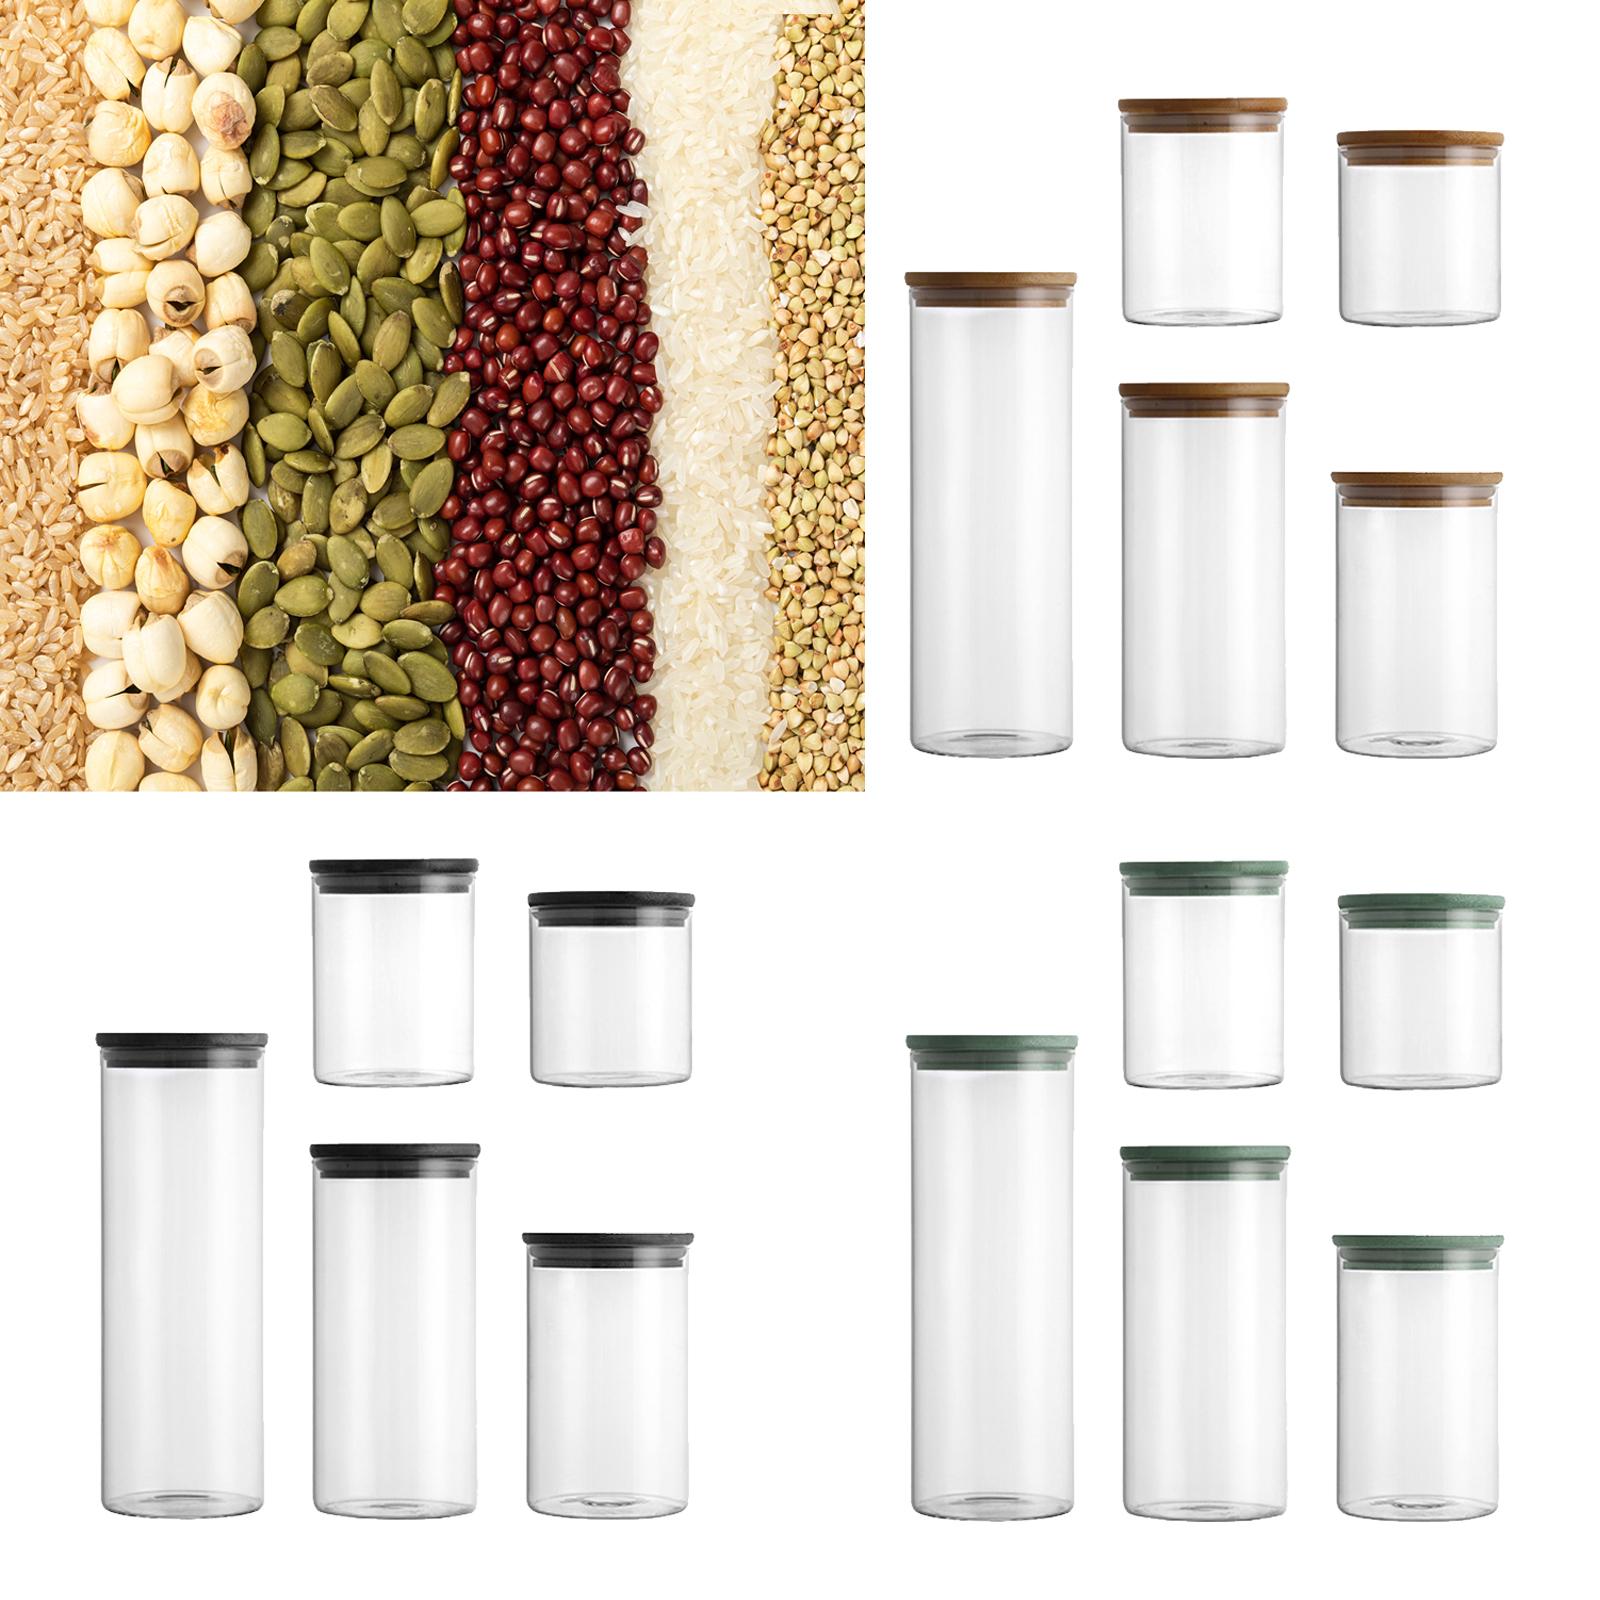 5x Food Storage Canisters Organizer Glass Storage Jar for Candy Spice Grains wooden cap